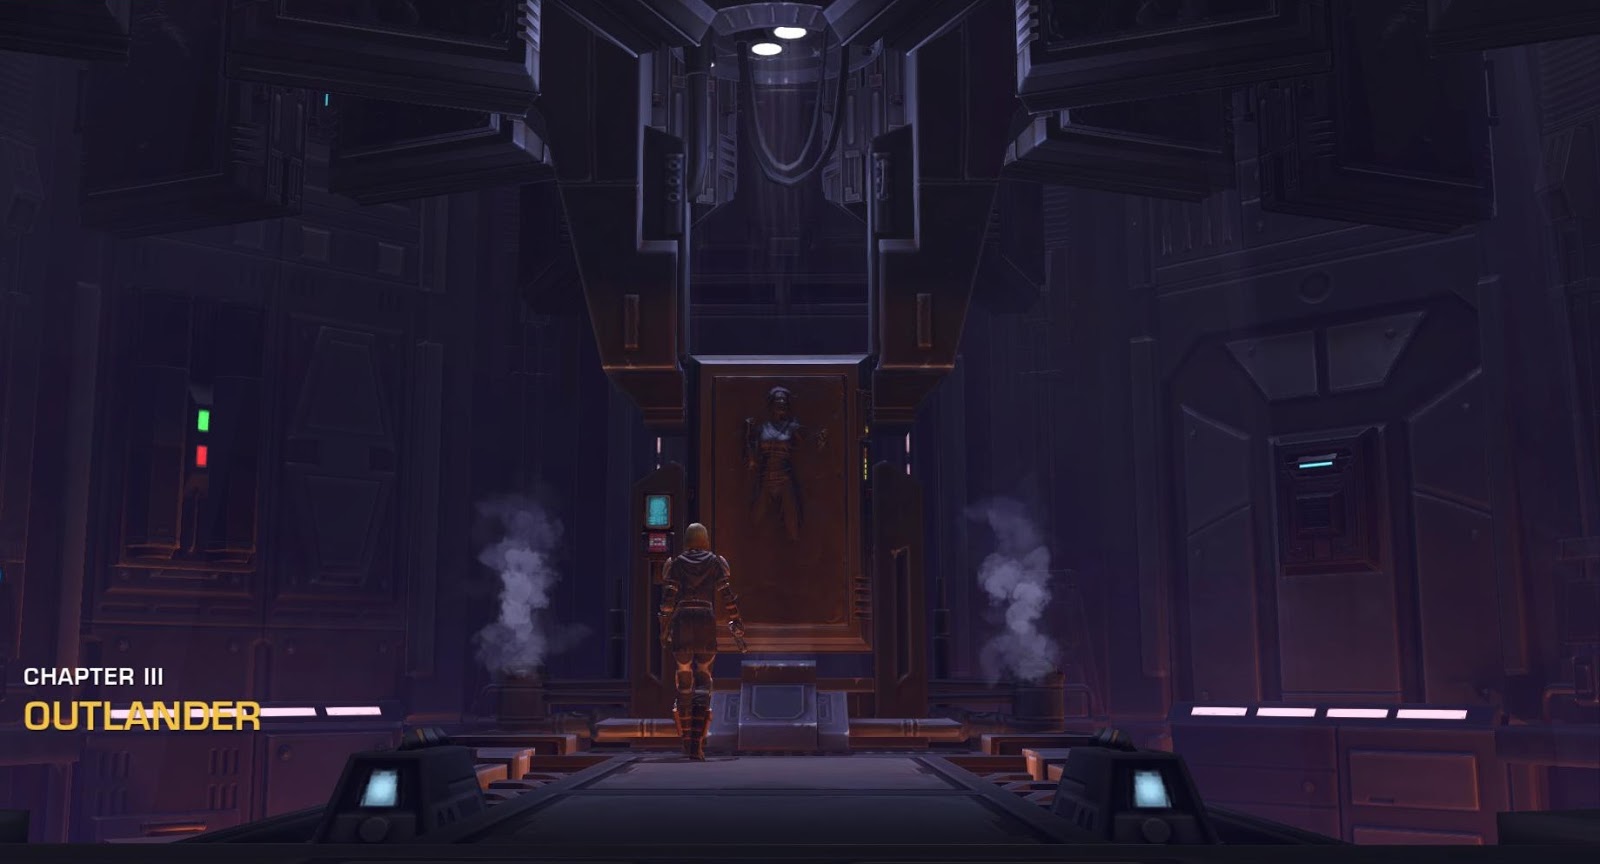 The Eternal Empire is officially pet-friendly! : r/swtor